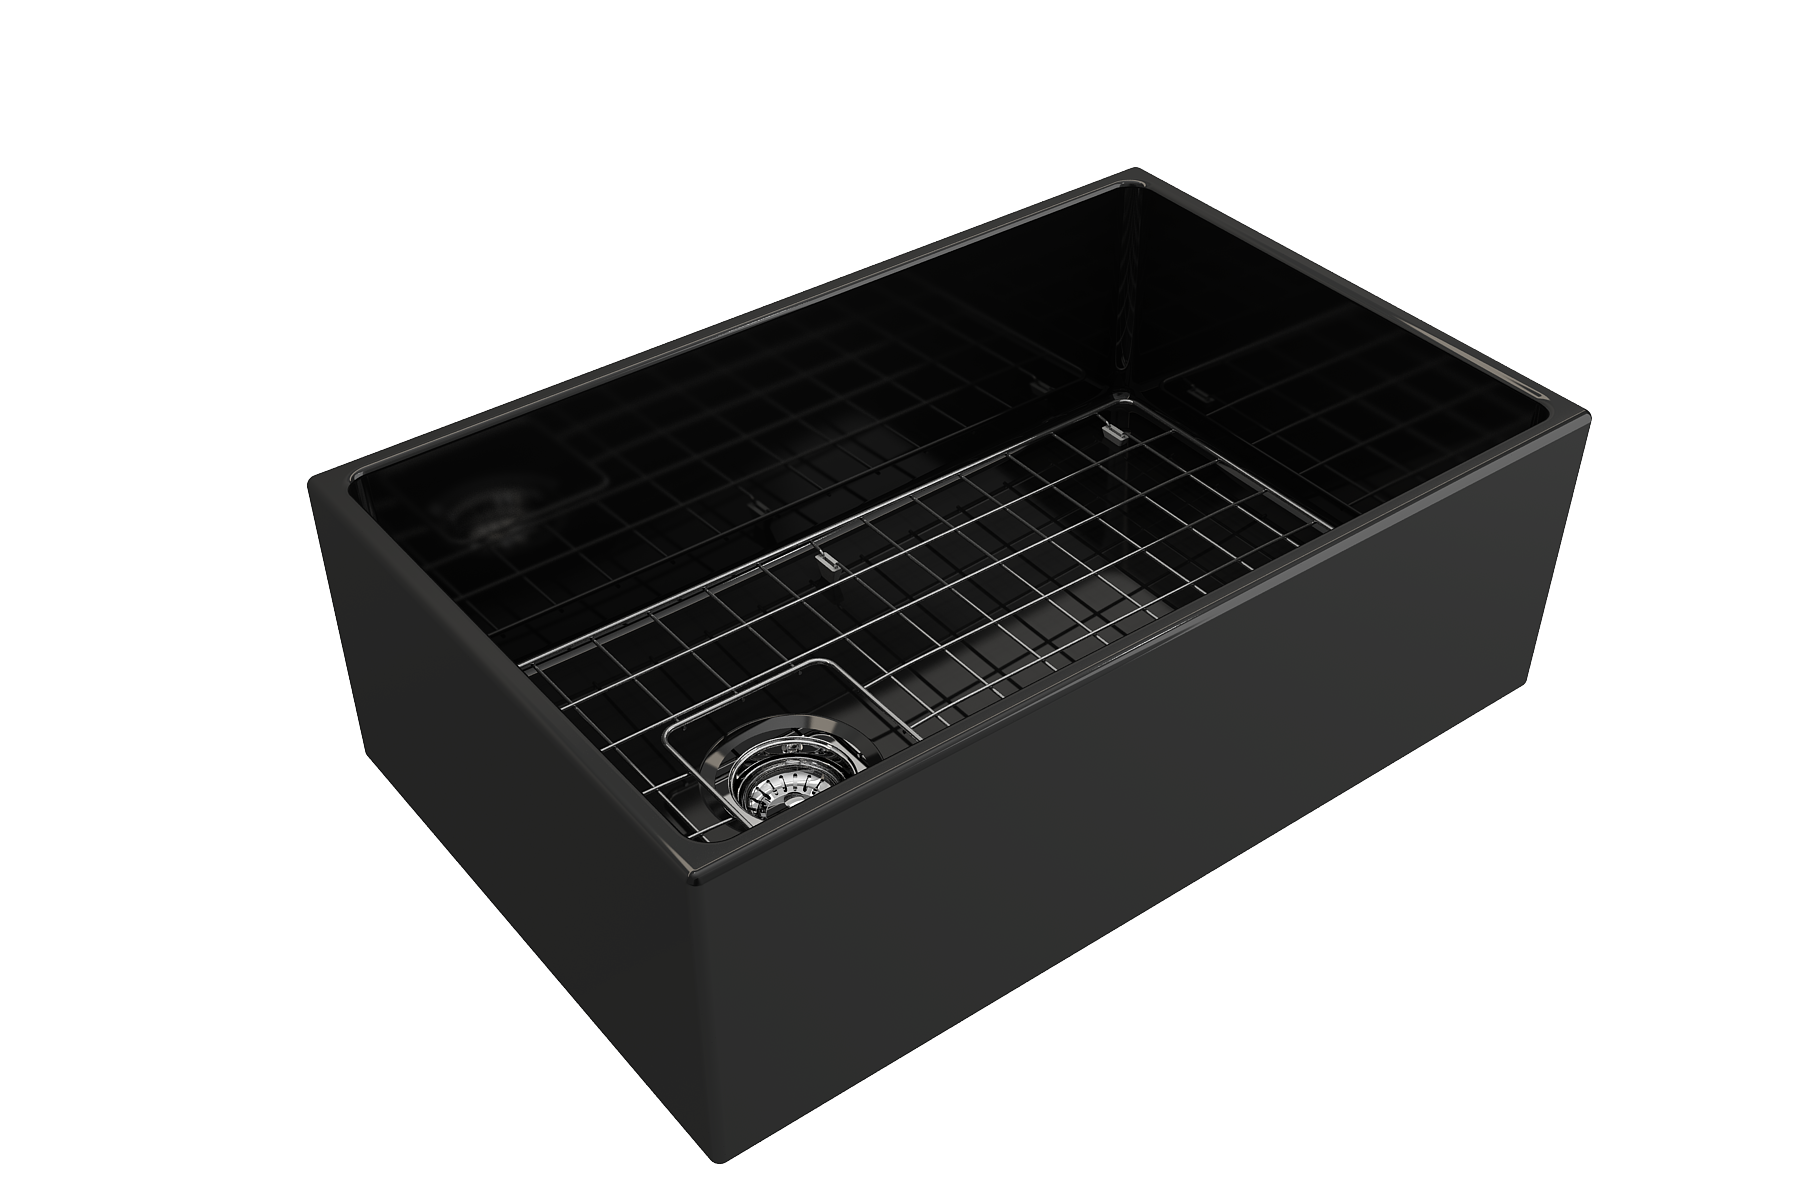 Bocchi Contempo Apron Front Fireclay 30" Single Bowl Kitchen Sink with Protective Bottom Grid and Strainer.